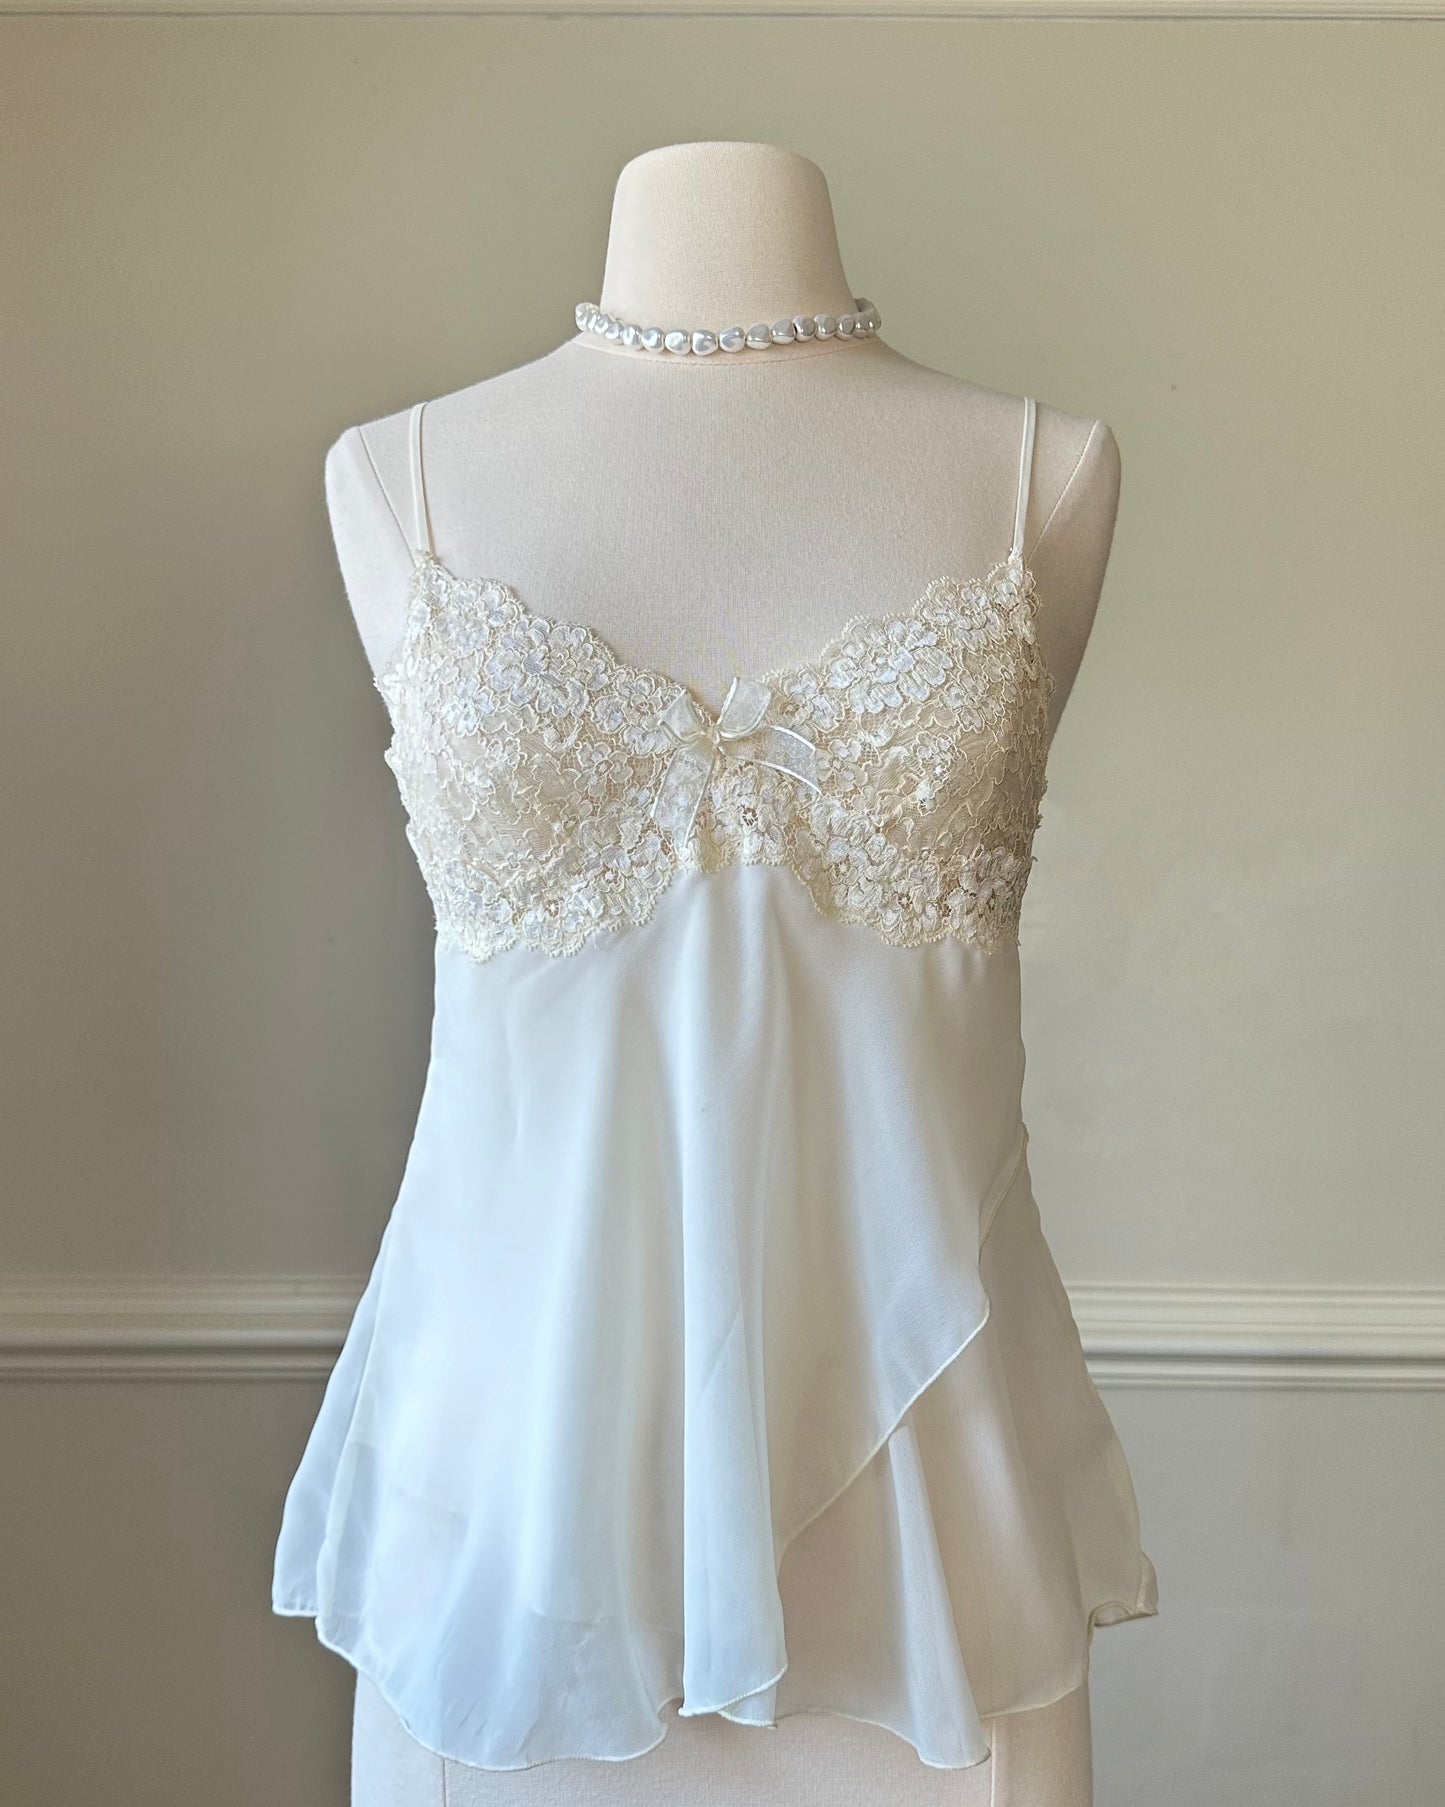 Fairy Sheer Vintage White Camisole featuring Delicate Floral Lace Bustier